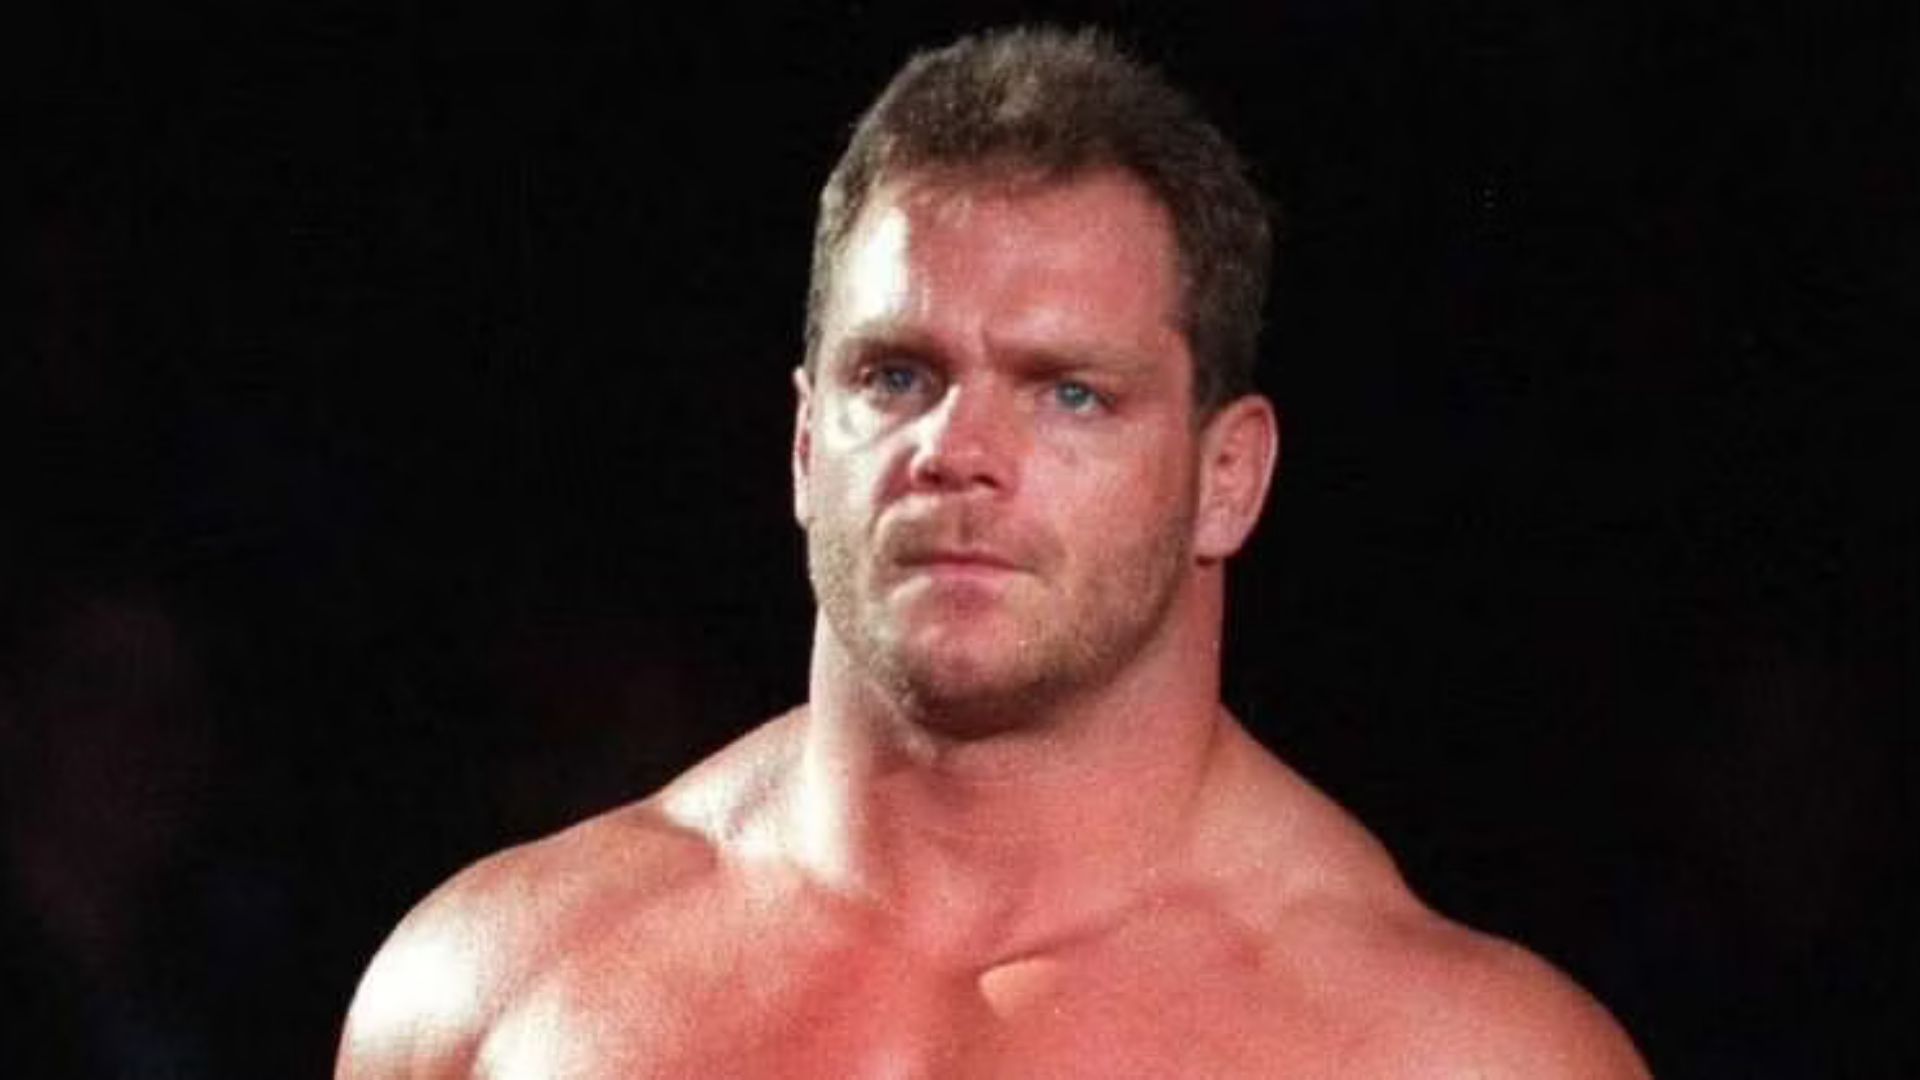 Chris Benoit&rsquo;s death remains one of the worst stories in wrestling history